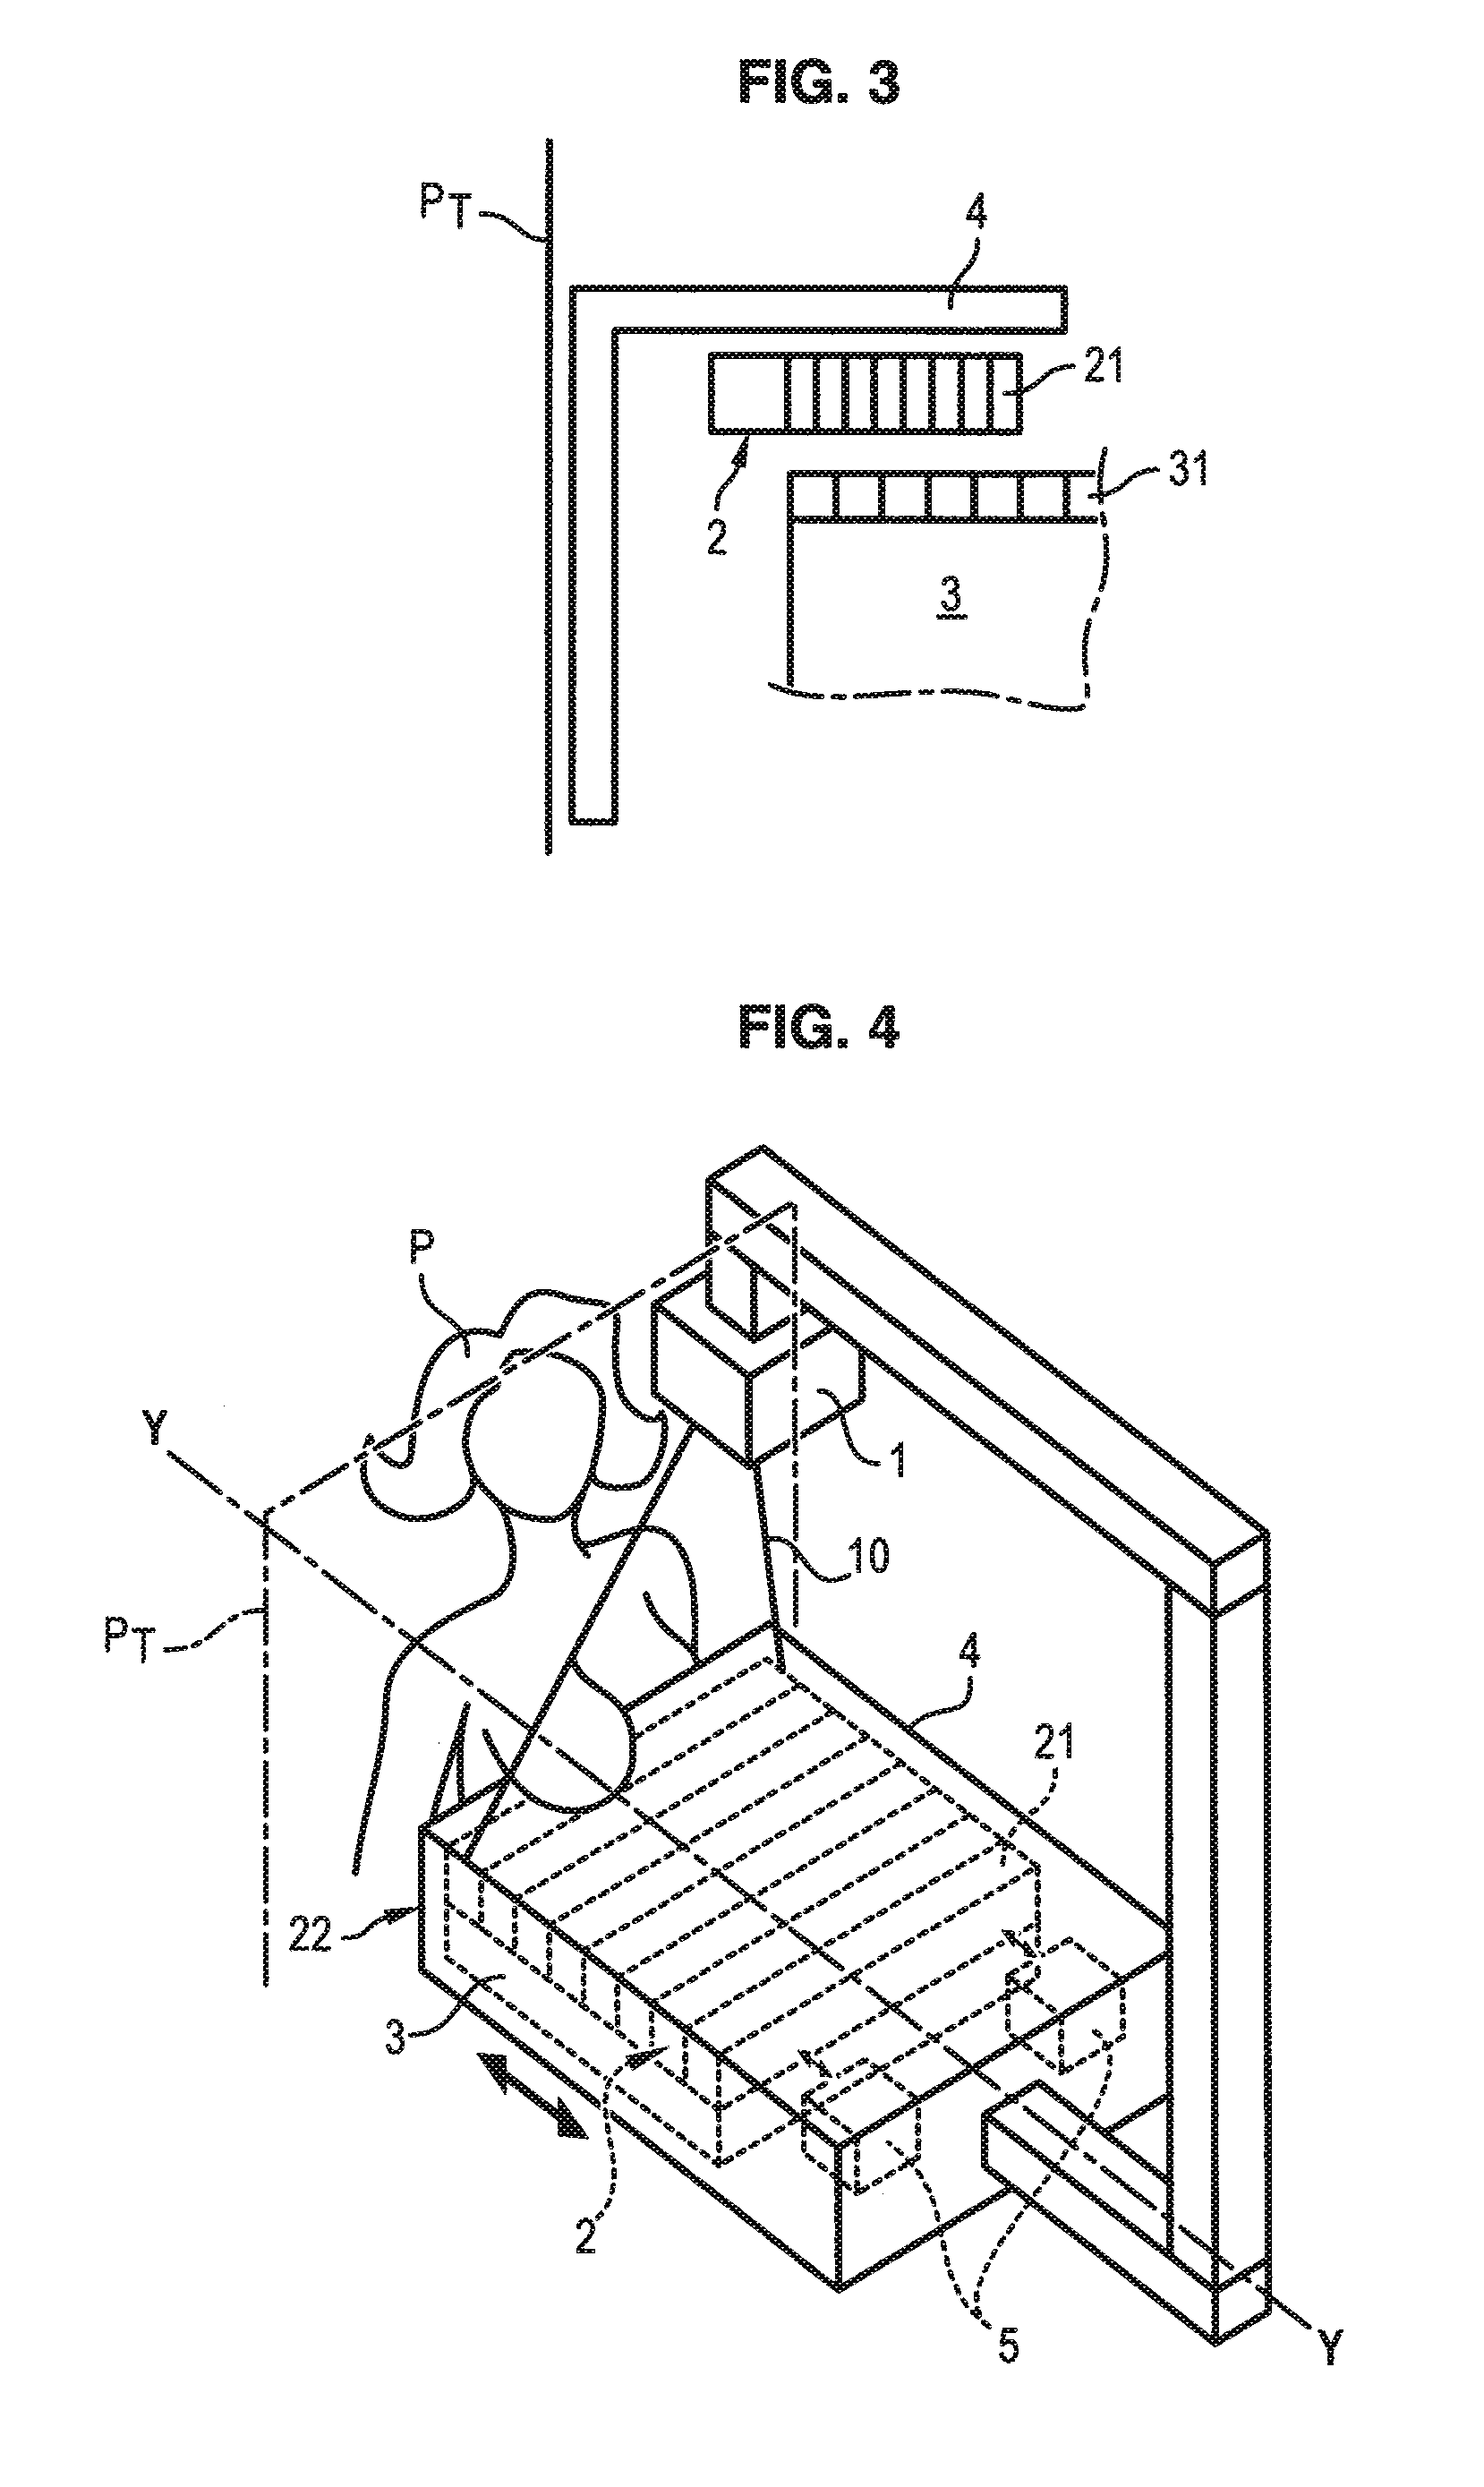 Process and device for deploying an Anti-scattering grid